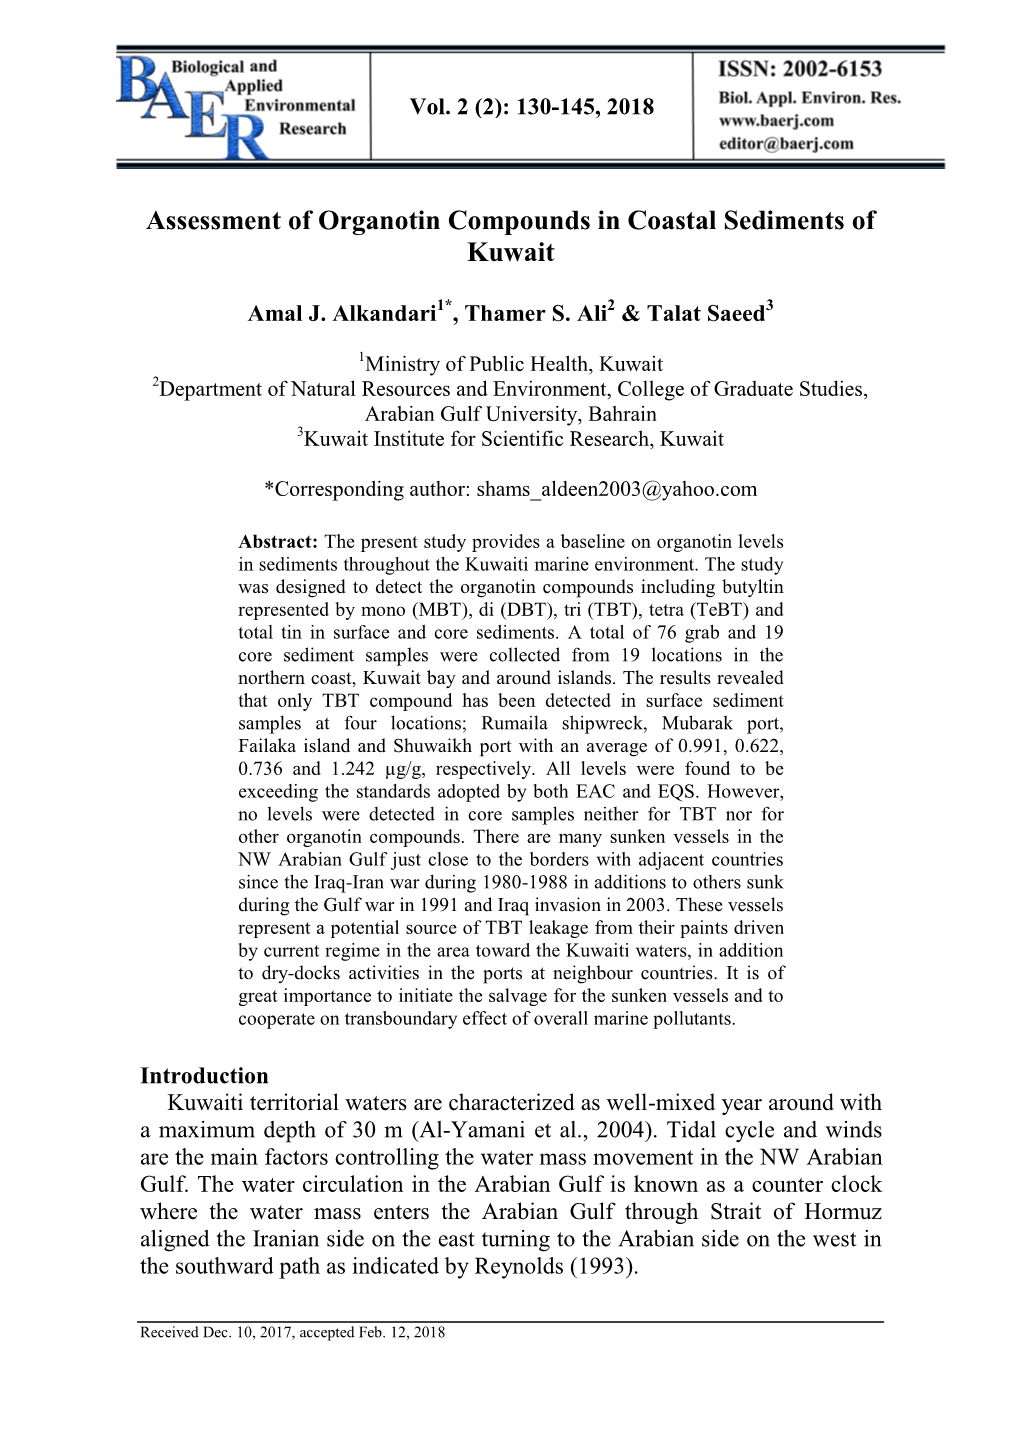 Assessment of Organotin Compounds in Coastal Sediments of Kuwait